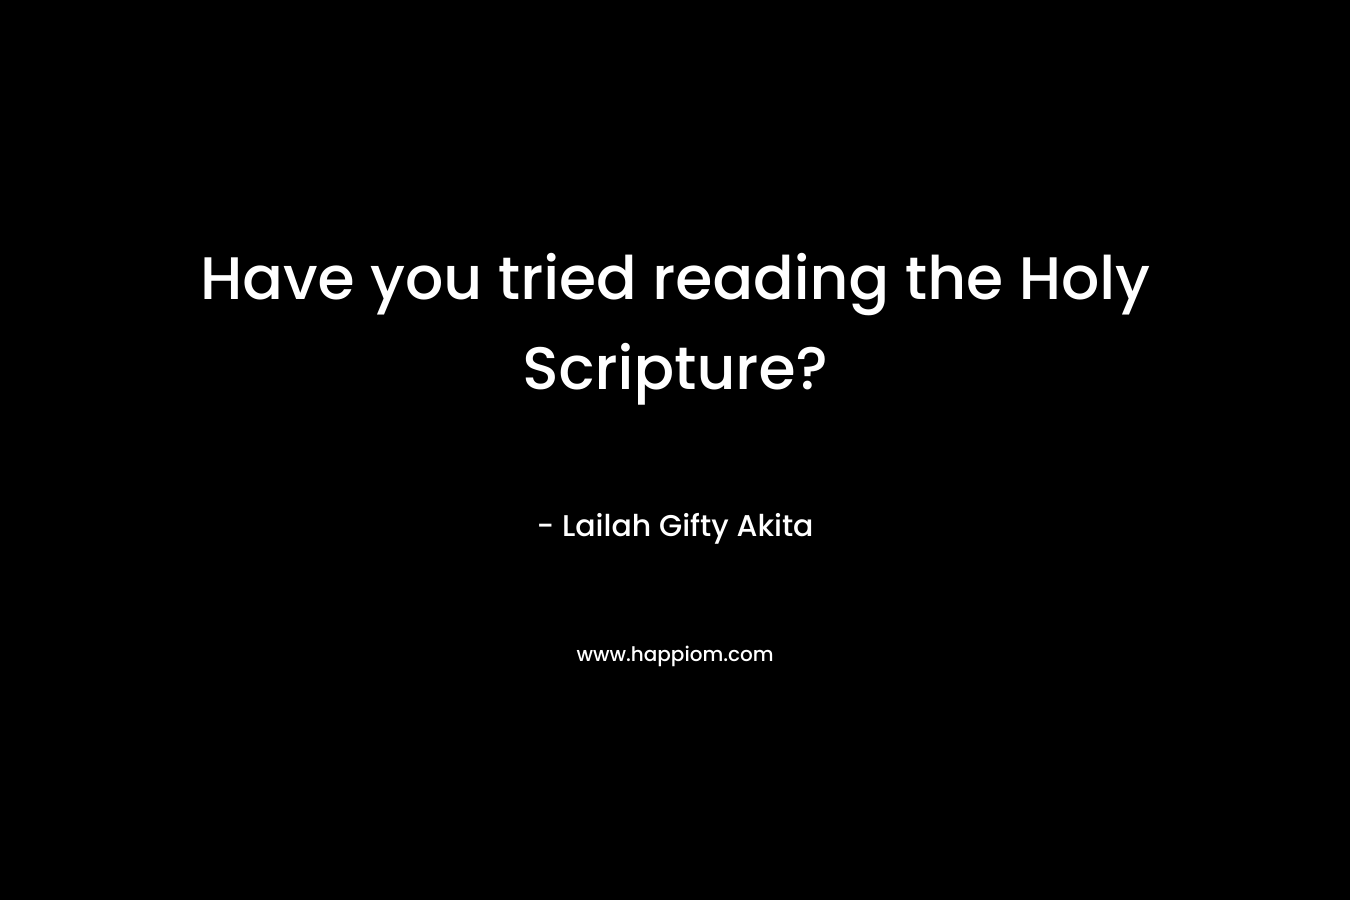 Have you tried reading the Holy Scripture?